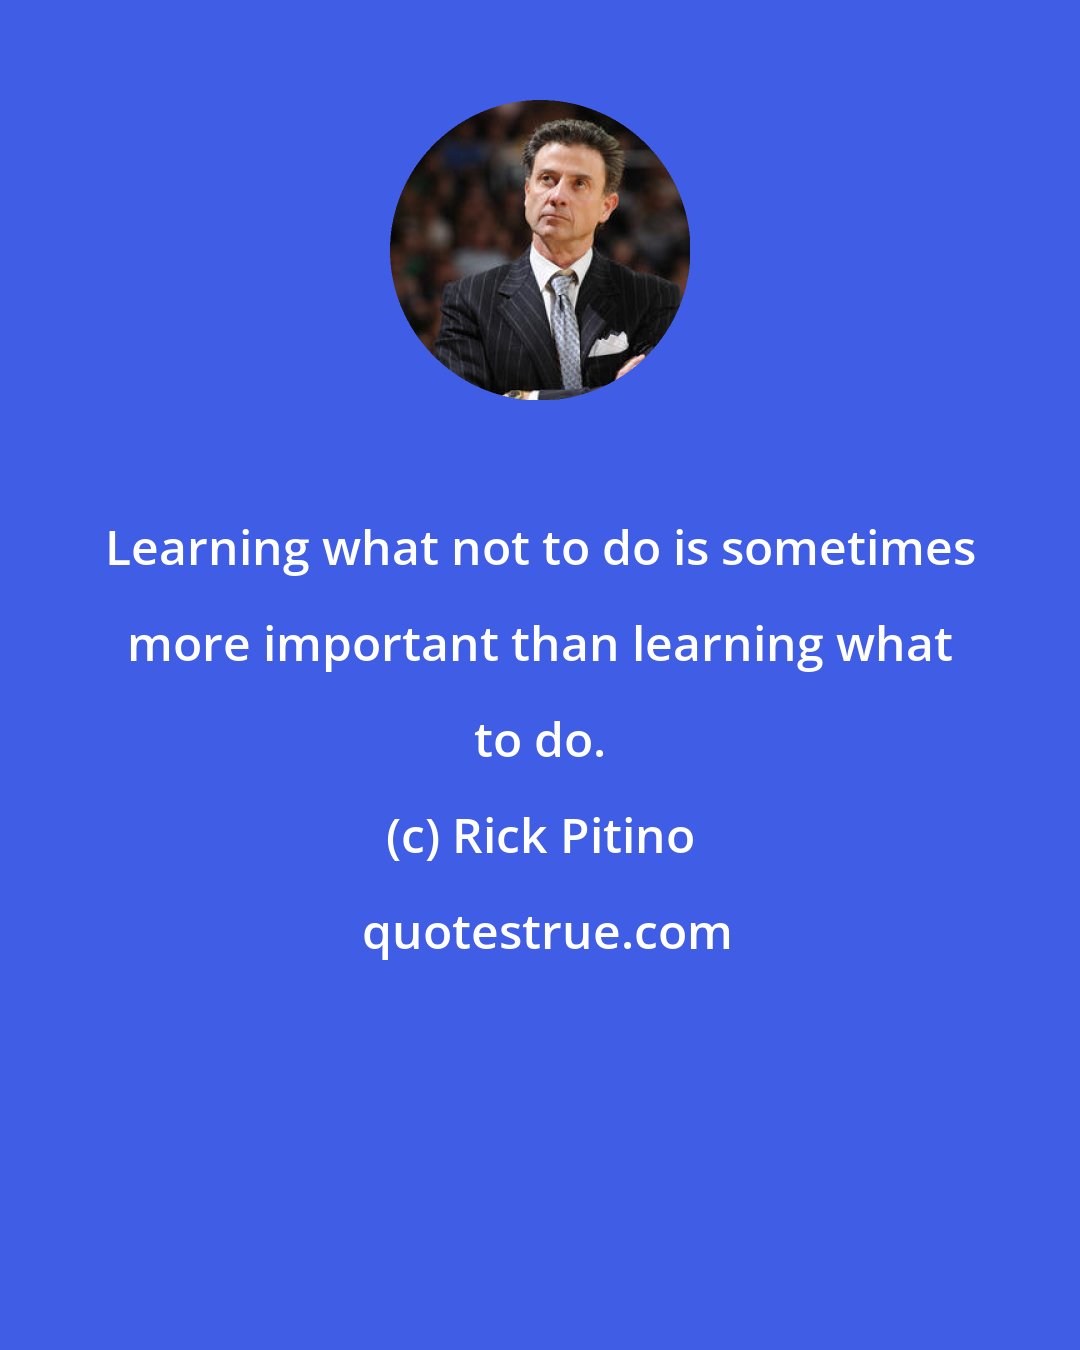 Rick Pitino: Learning what not to do is sometimes more important than learning what to do.